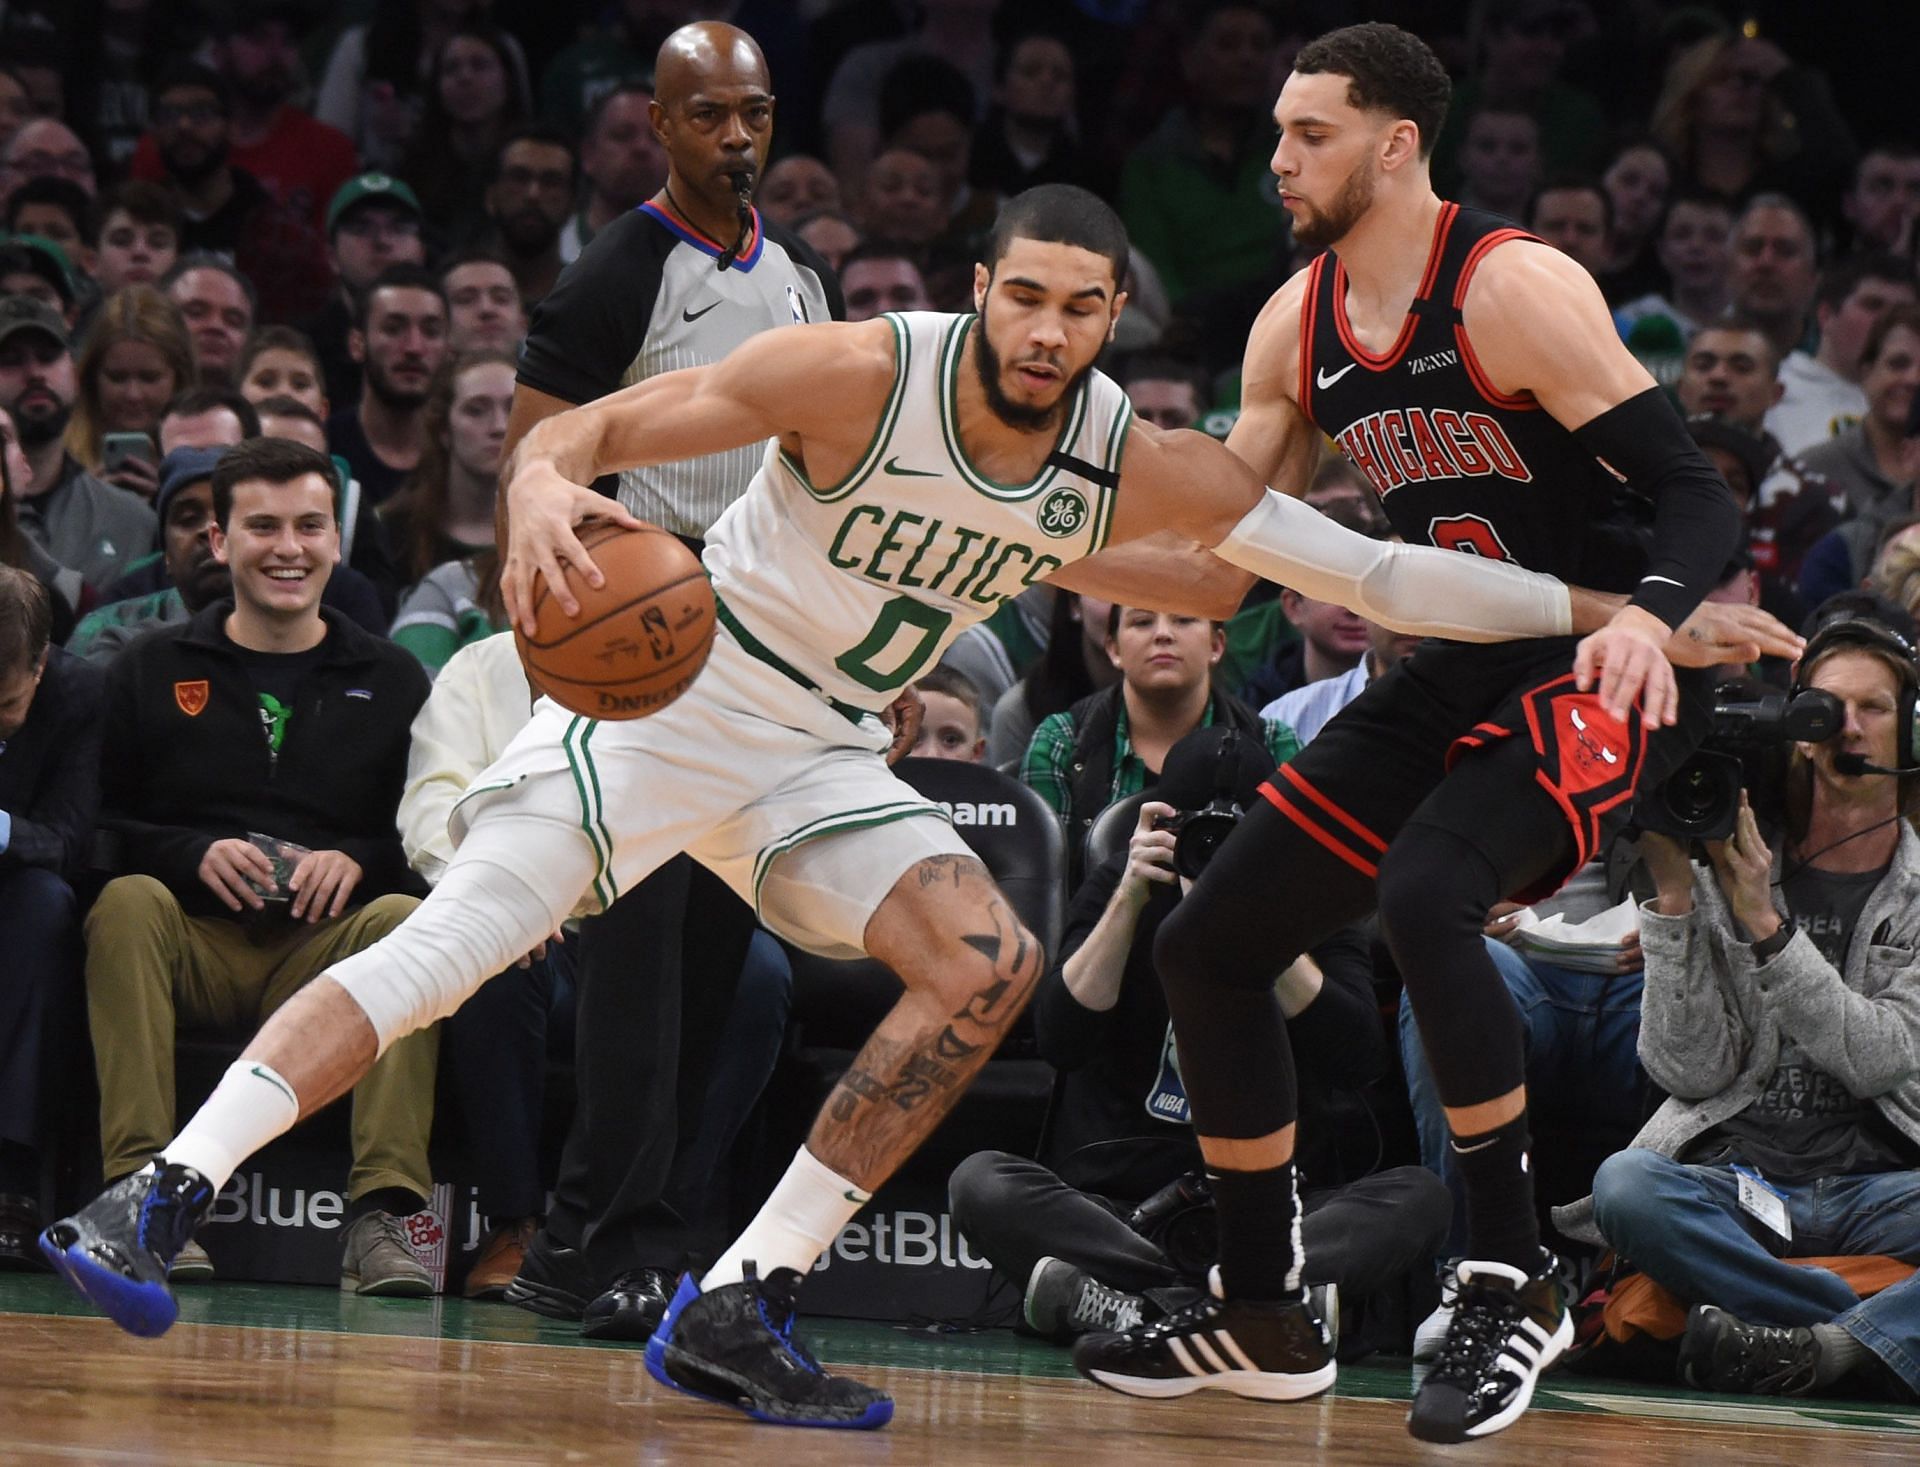 Jayson Tatum and the Boston Celtics will try to win for the first time at home against Zach LaVine and the Chicago Bulls [Photo: Lowell Sun]